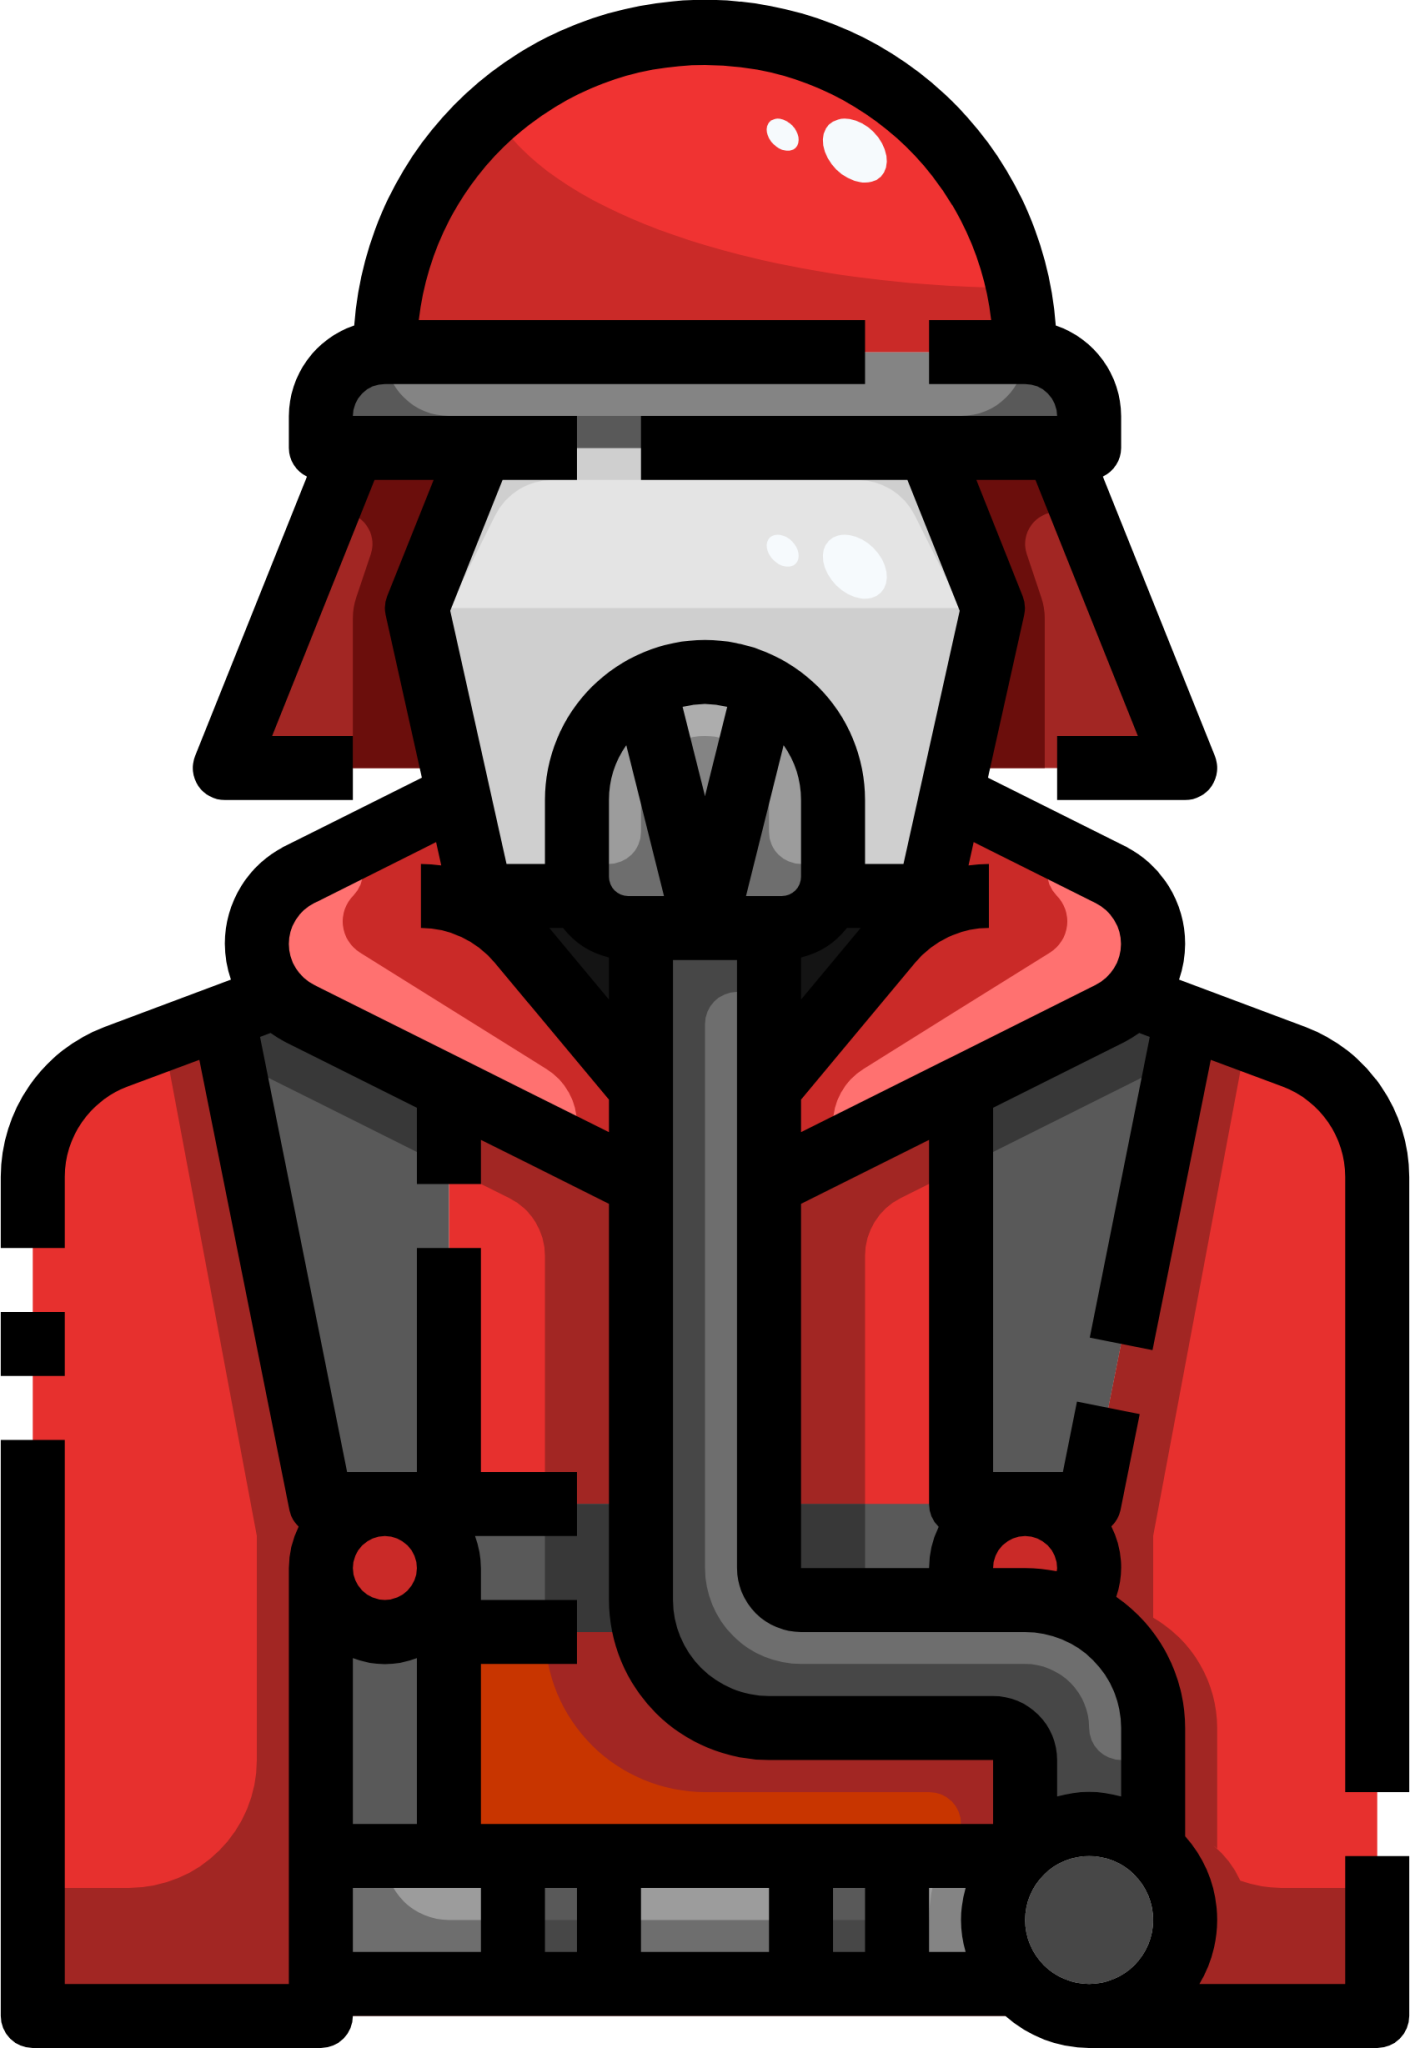 firefighter icon